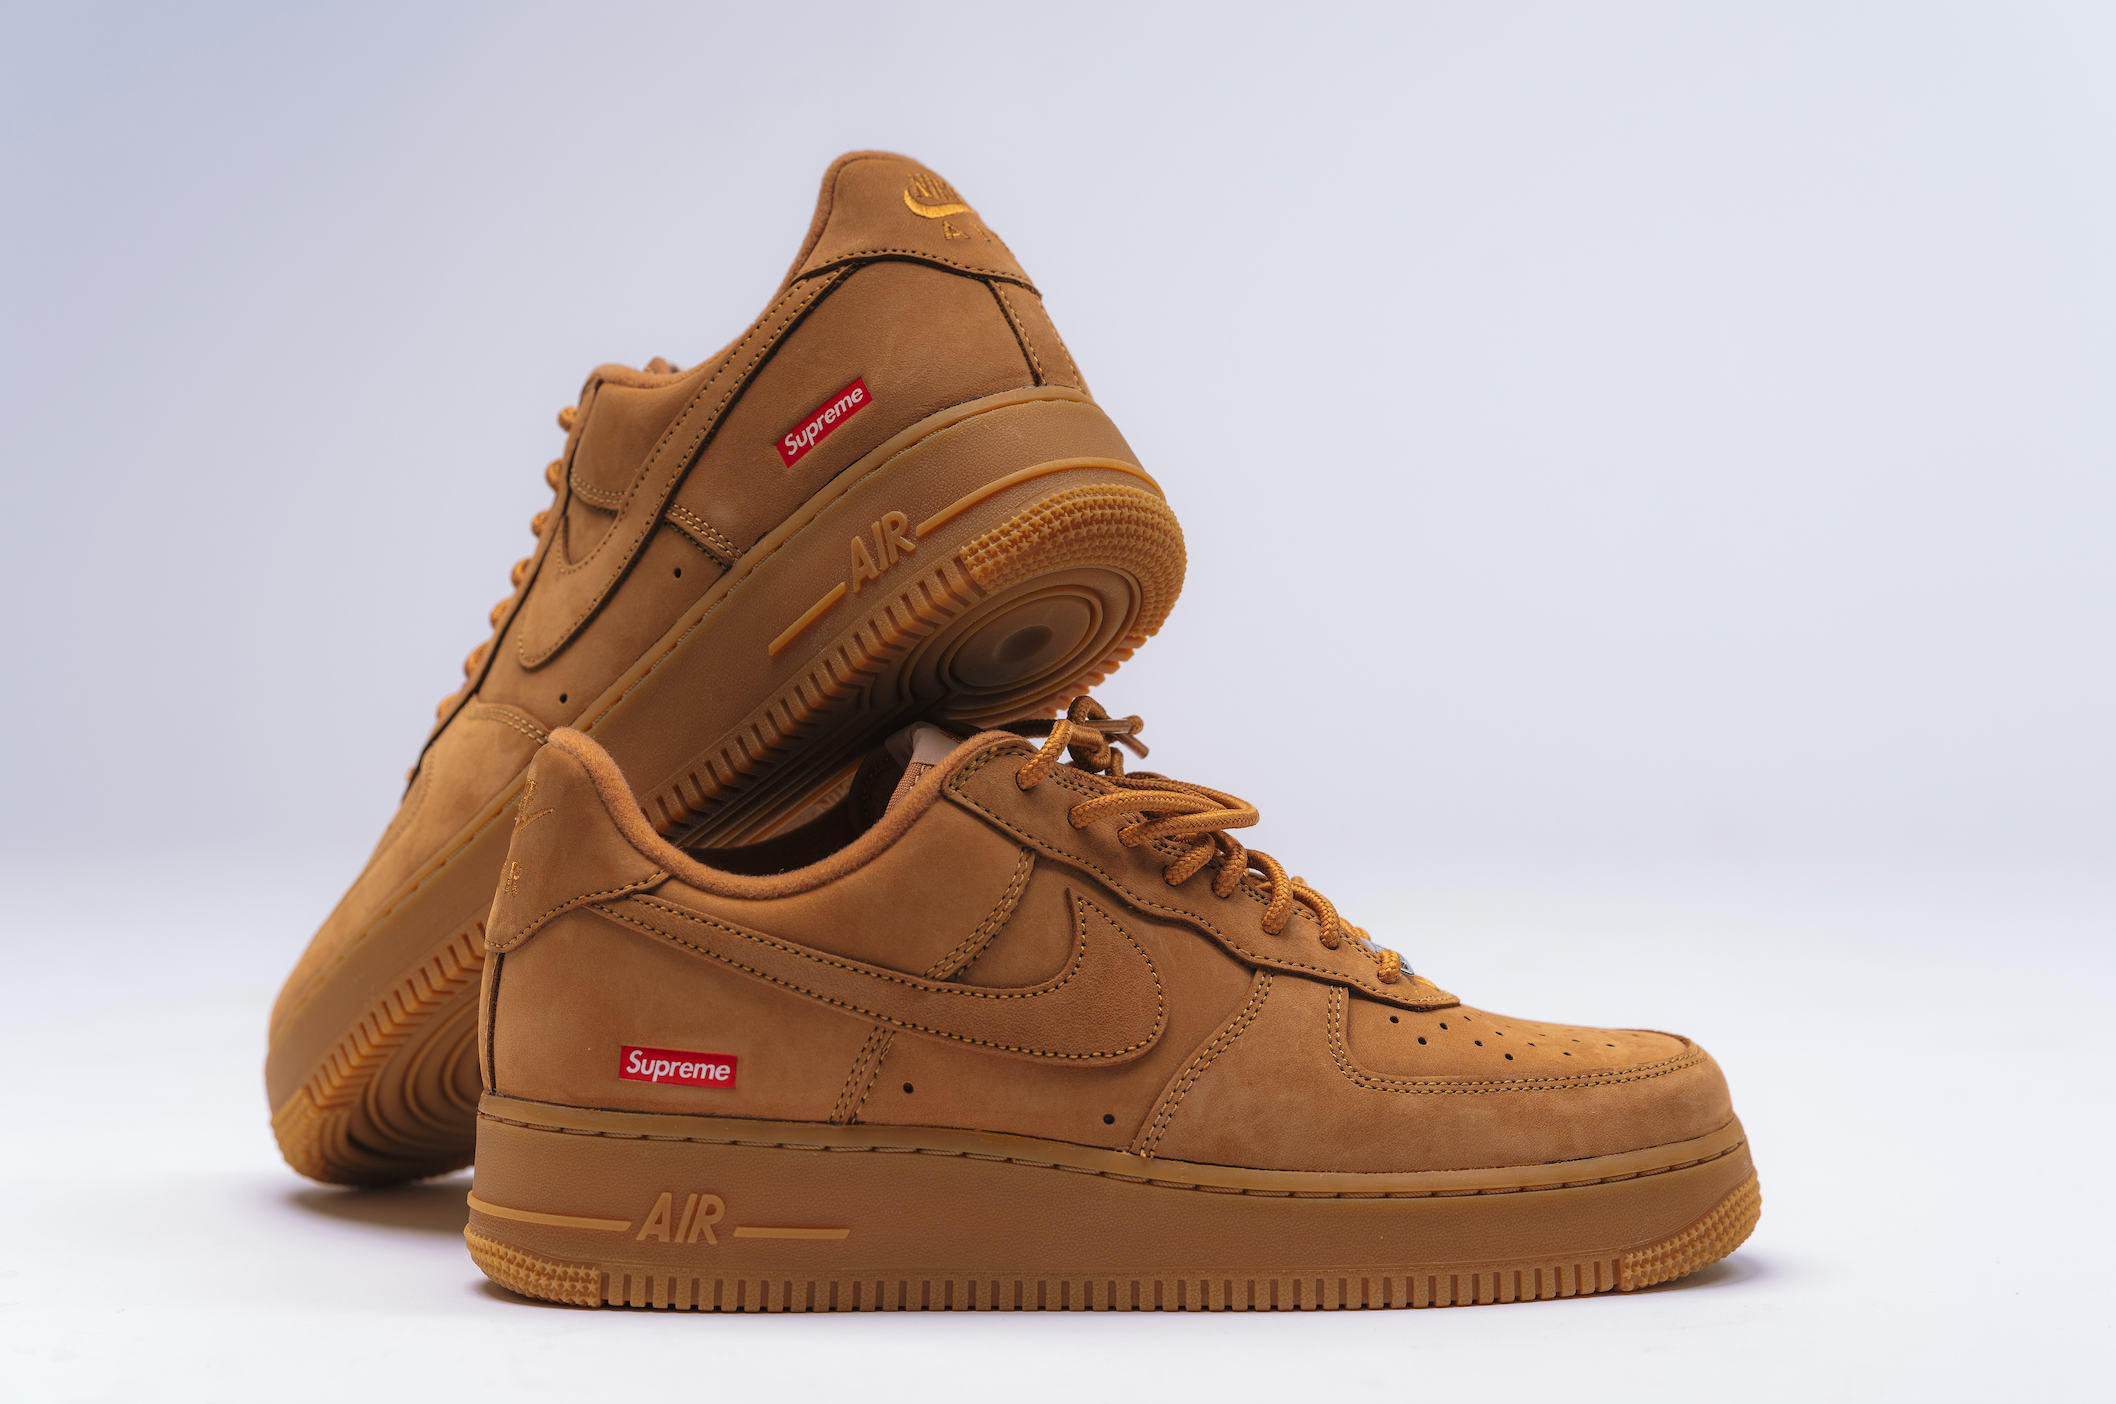 nike air force hi supreme le shop of shoes price, nike air brand new  mexico locations